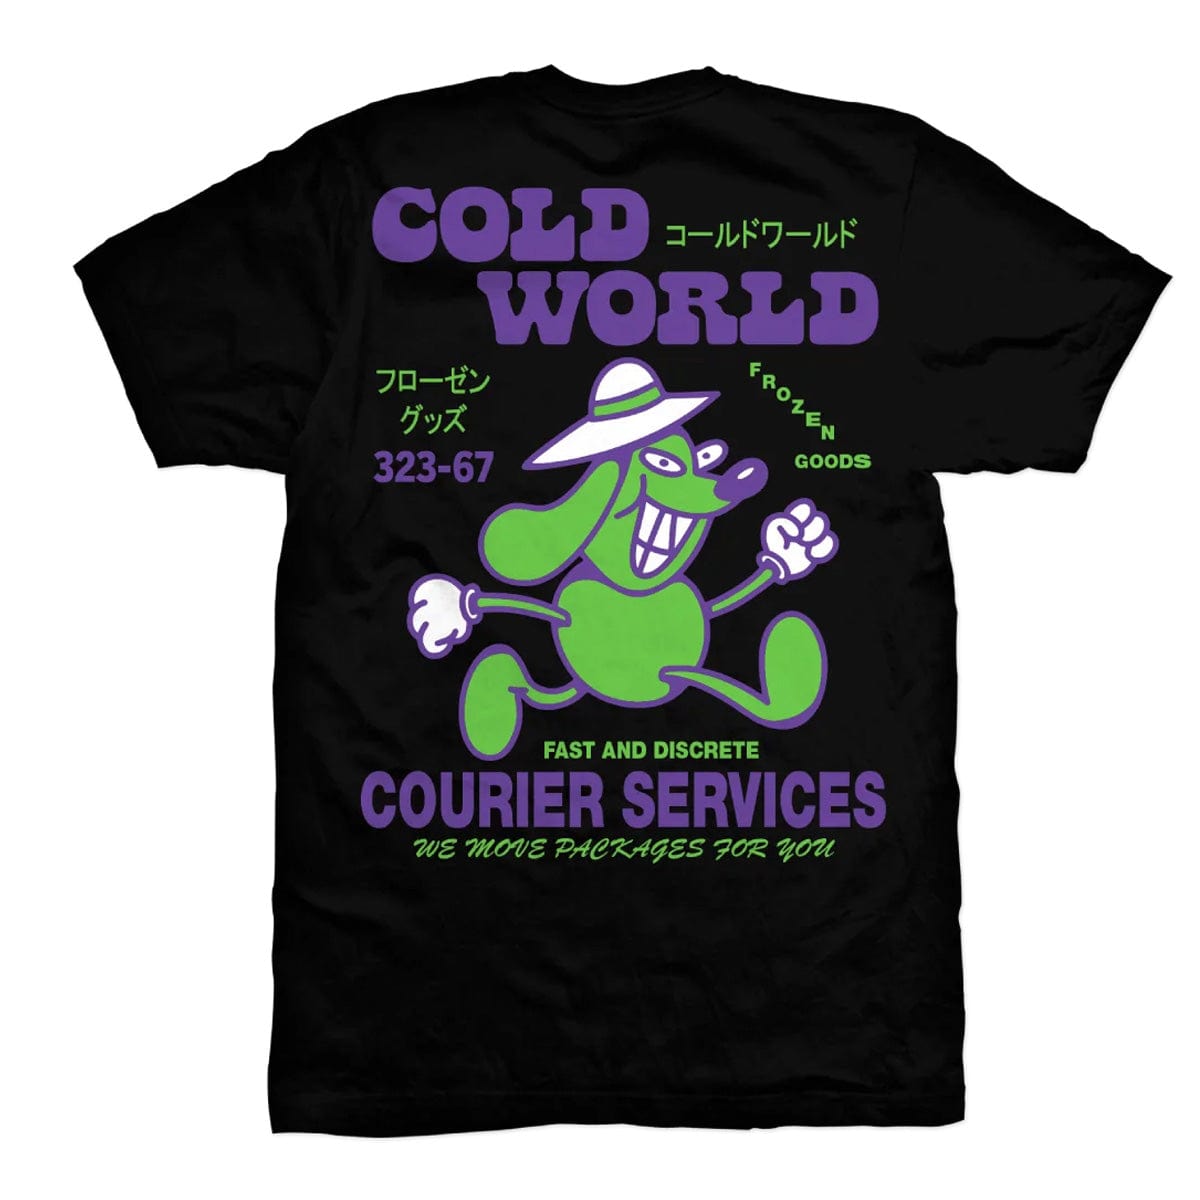 Cold World Frozen Goods T-Shirts COURIER SERVICE TEE